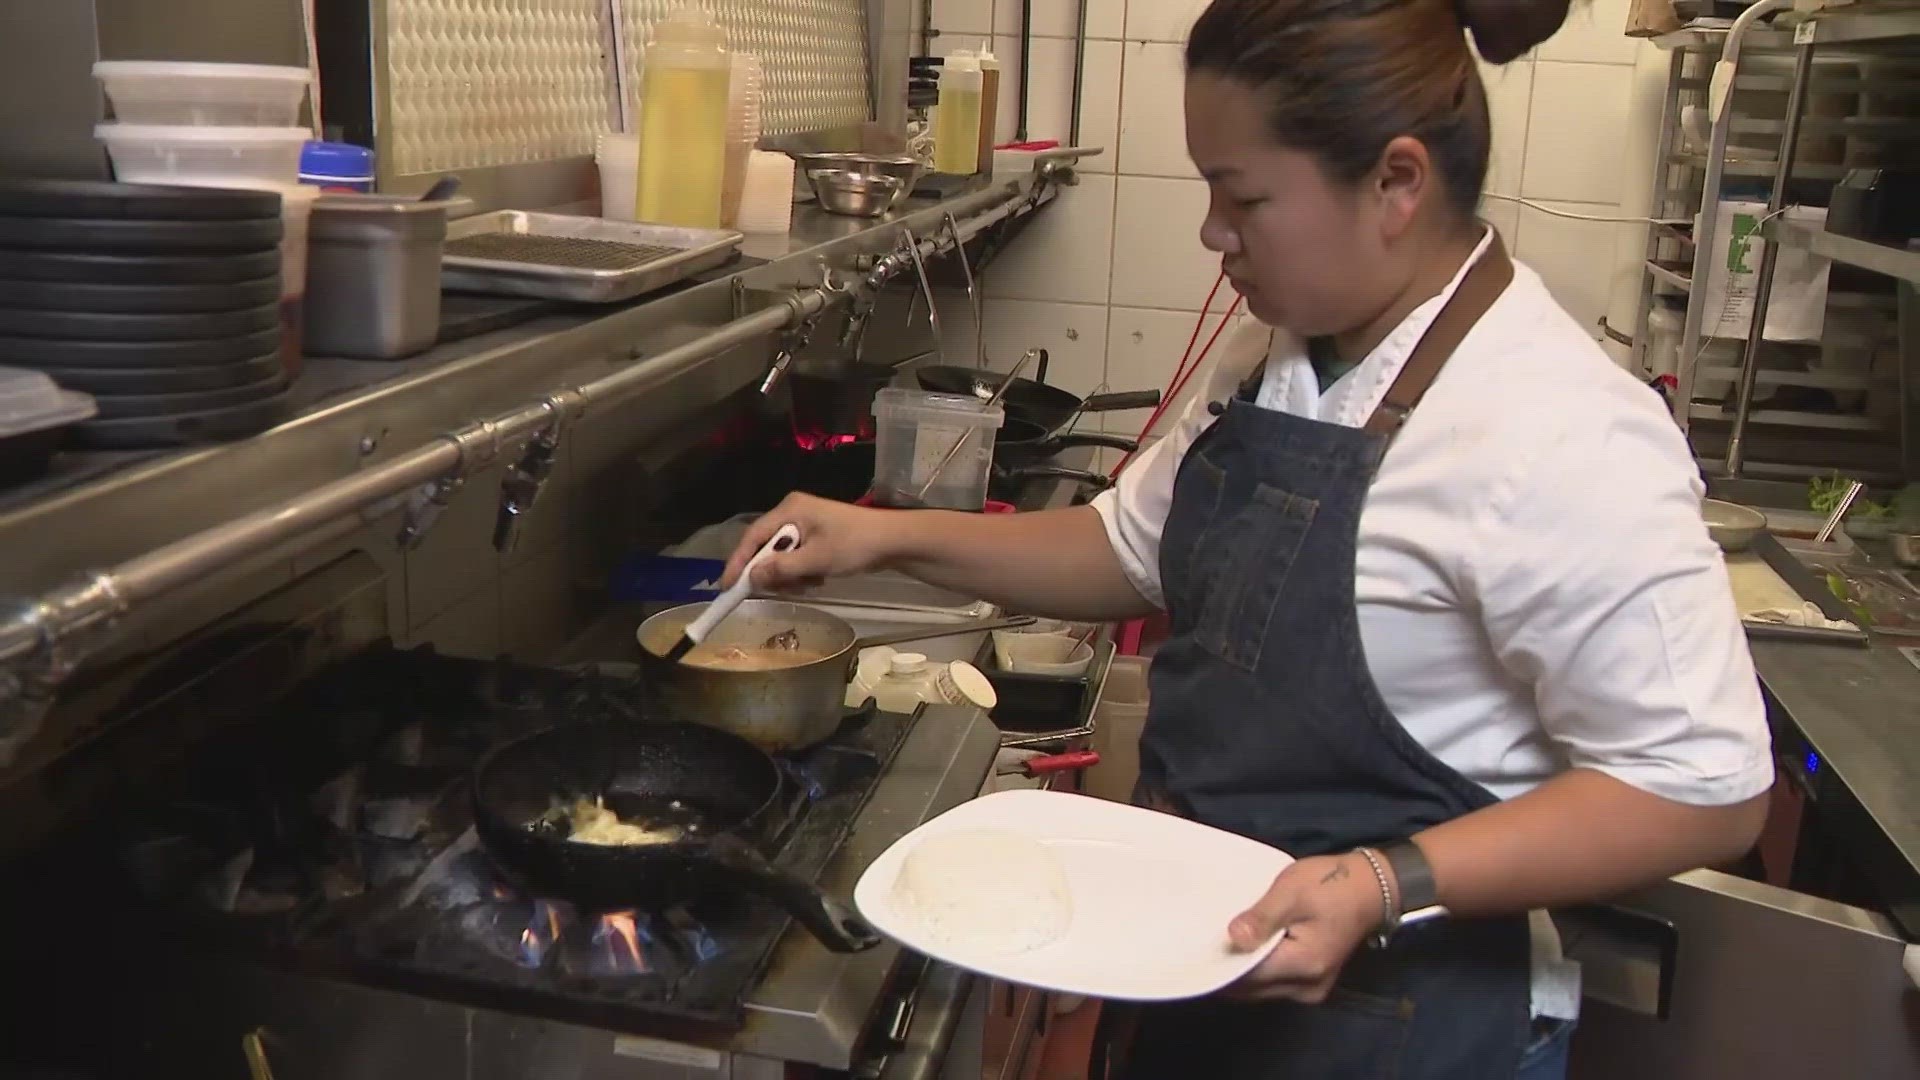 “Chef G" runs a small restaurant on Houston’s East End called Street to Kitchen.